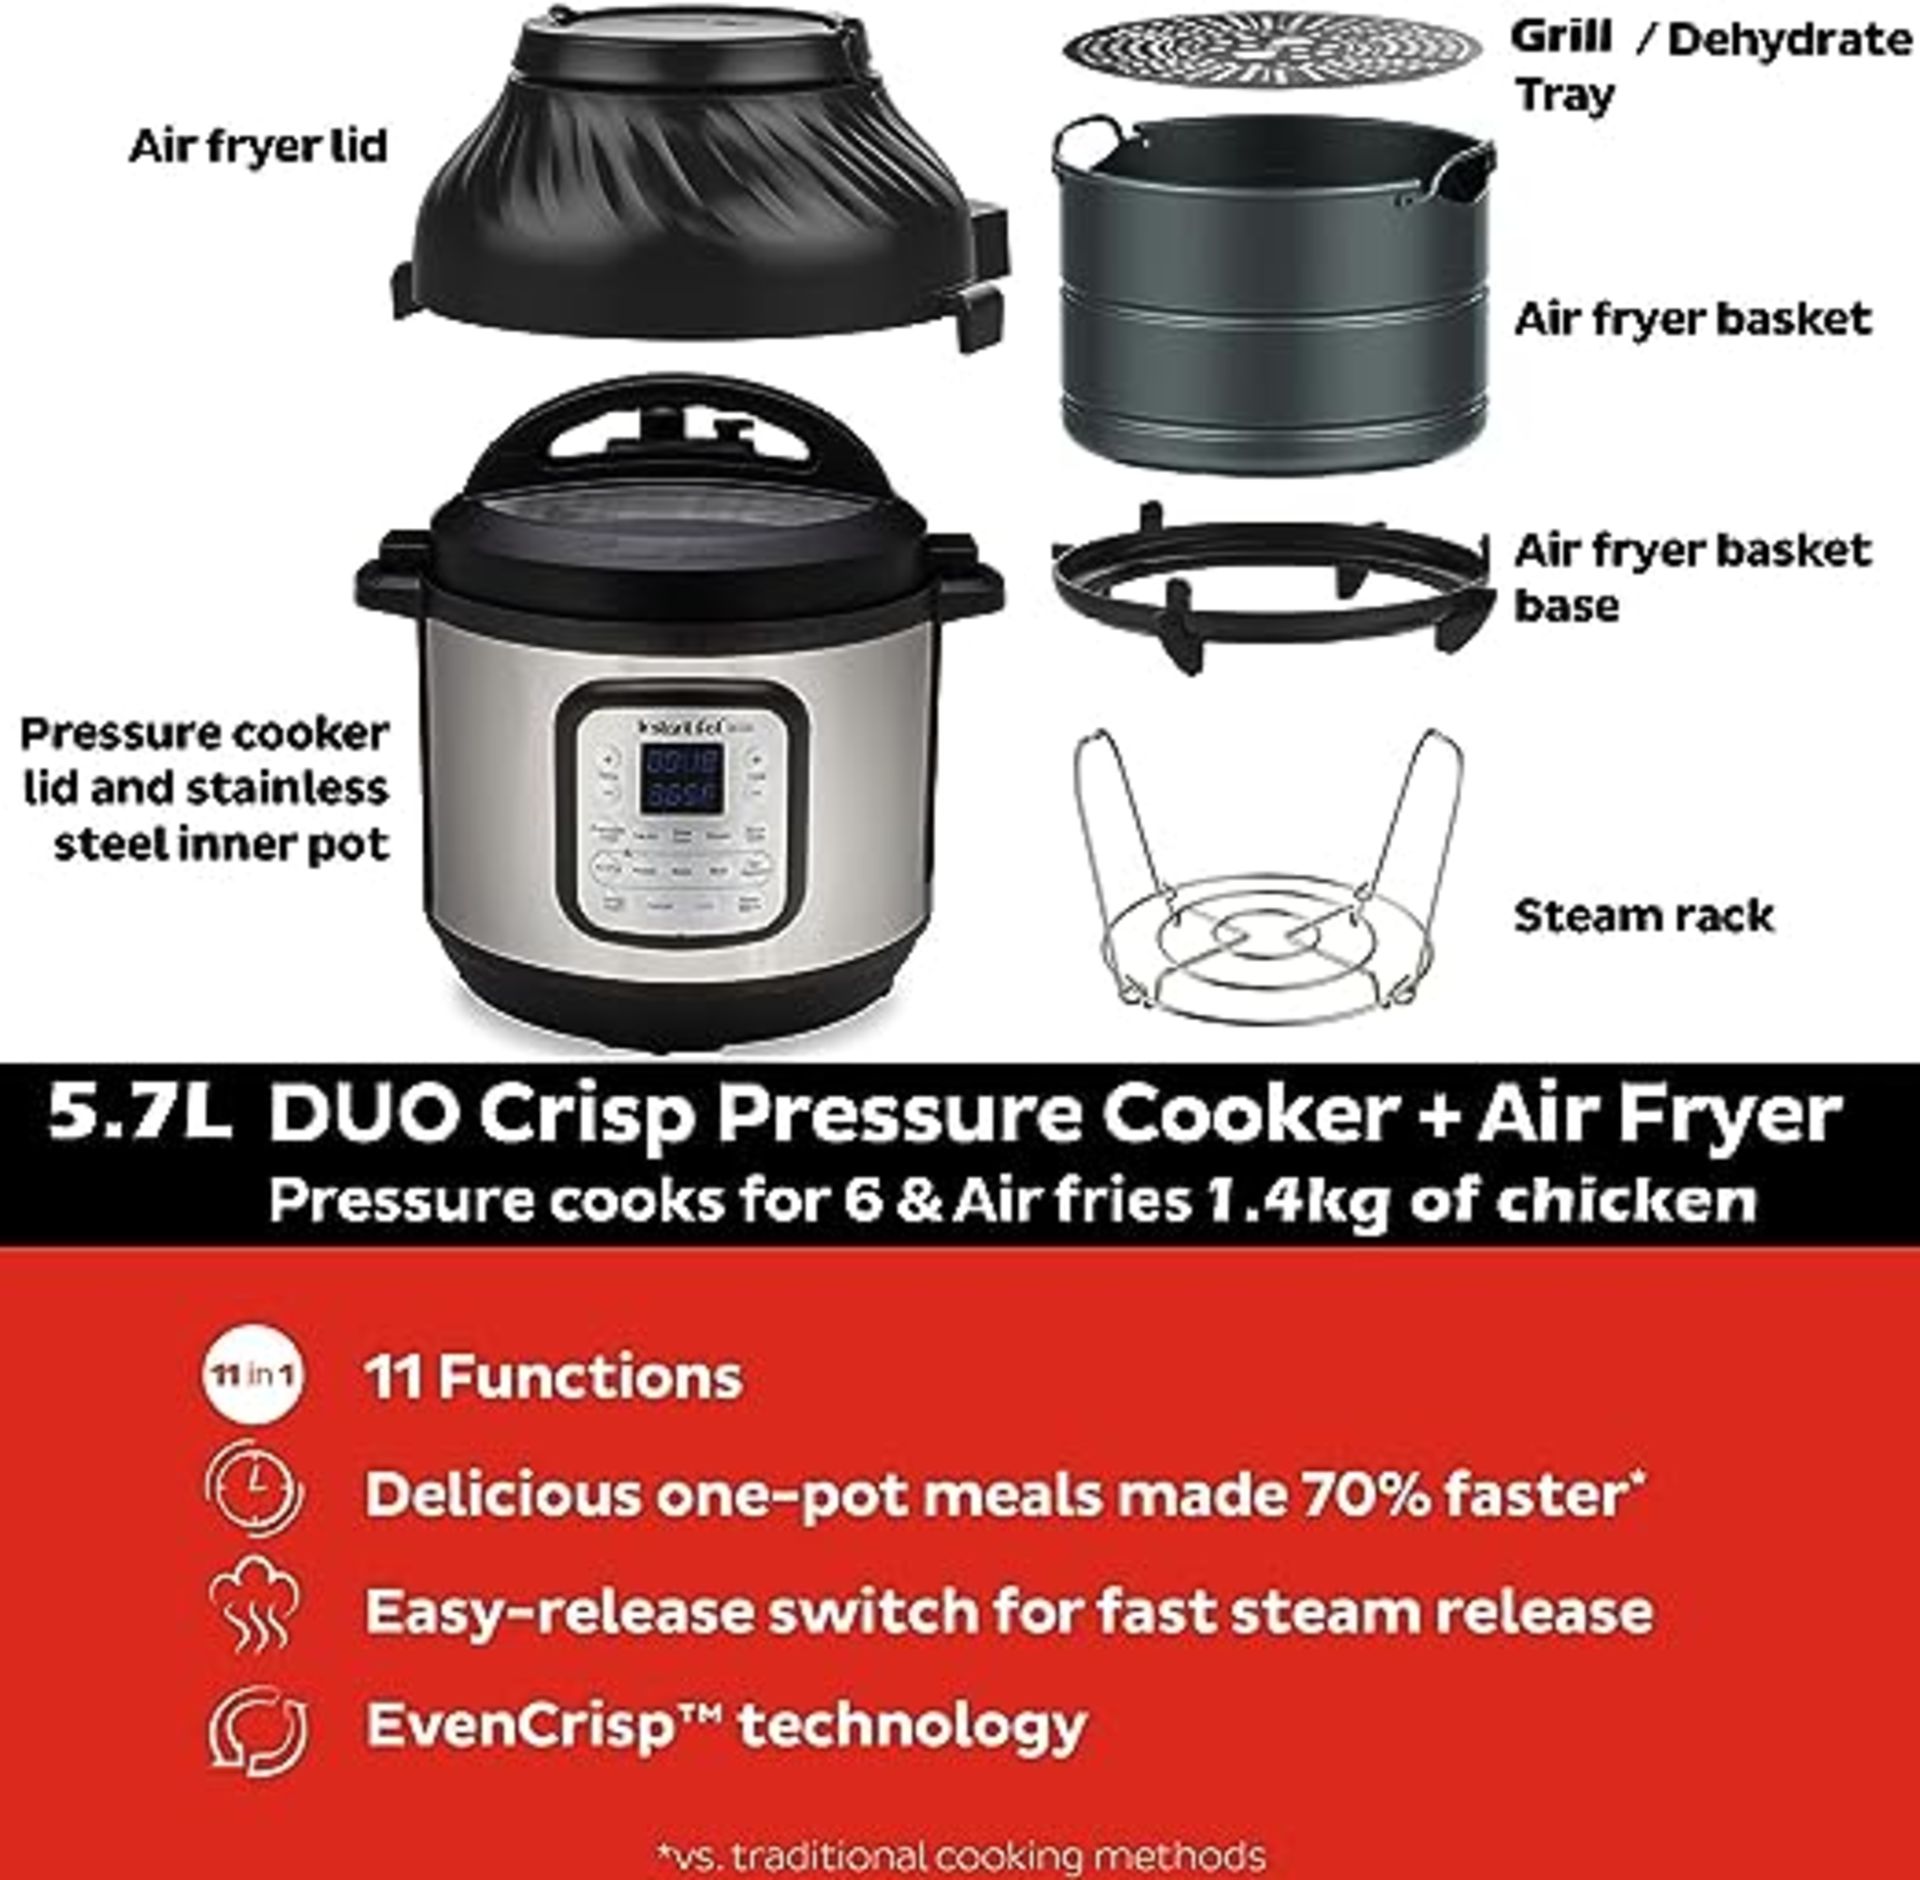 Trade Lot 8 x Brand New Instant Pot Duo Crisp + Air Fryer 11-in-1 Electric Multi-Cooker, 5.7L - - Image 3 of 3